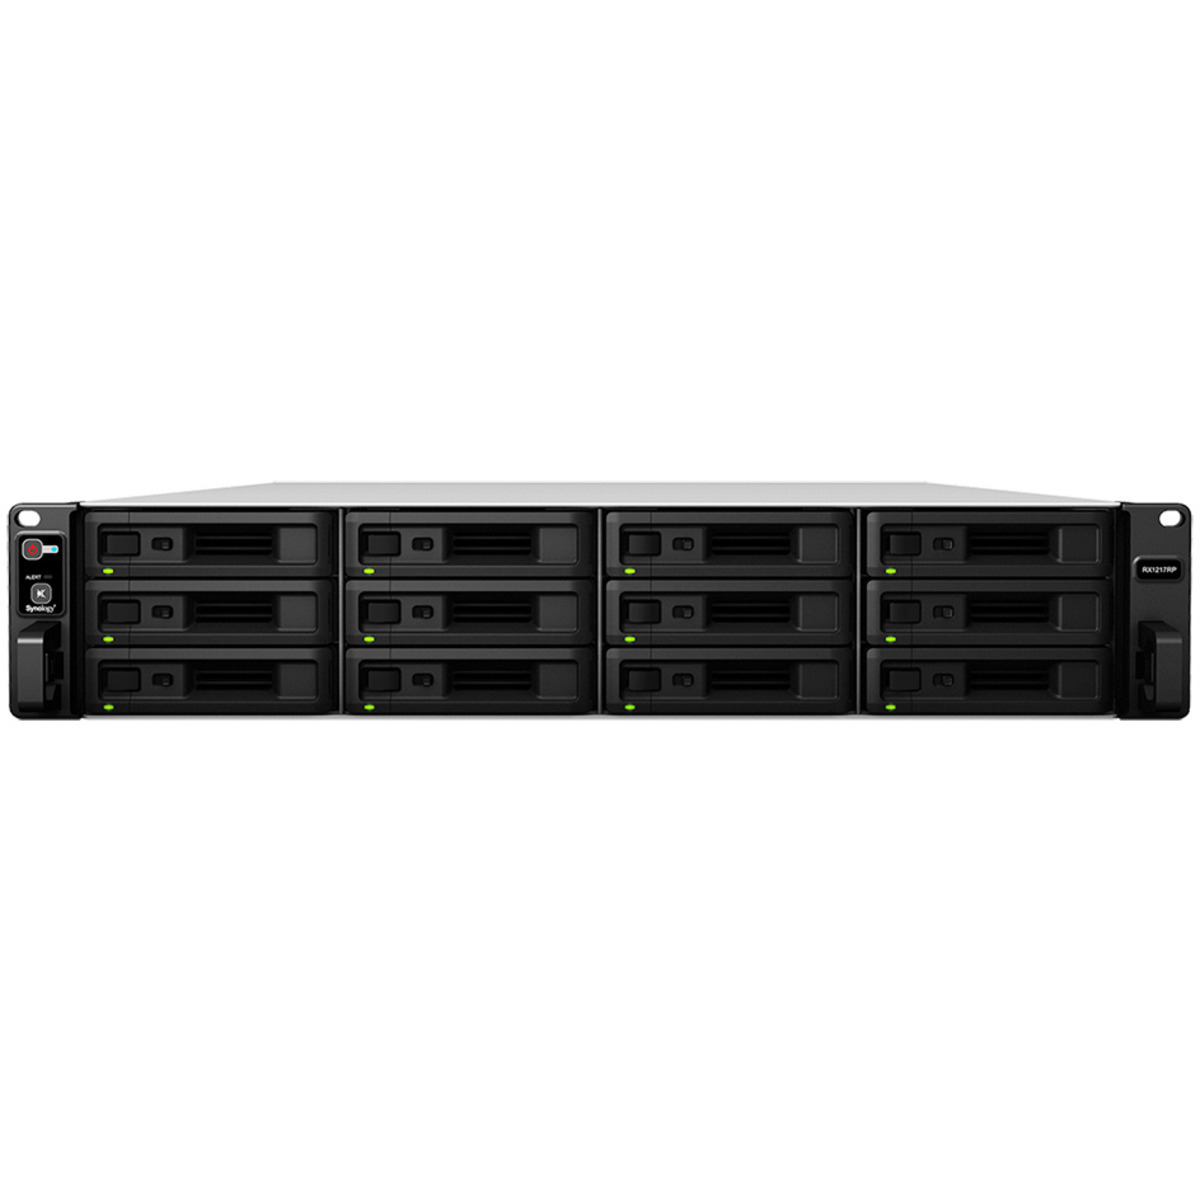 buy $5761 Synology RX1217 240tb RackMount Expansion Enclosure 12x20000gb Seagate EXOS X20 ST20000NM007D 3.5 7200rpm SATA 6Gb/s HDD ENTERPRISE Class Drives Installed - Burn-In Tested - nas headquarters buy network attached storage server device das new raid-5 free shipping usa RX1217